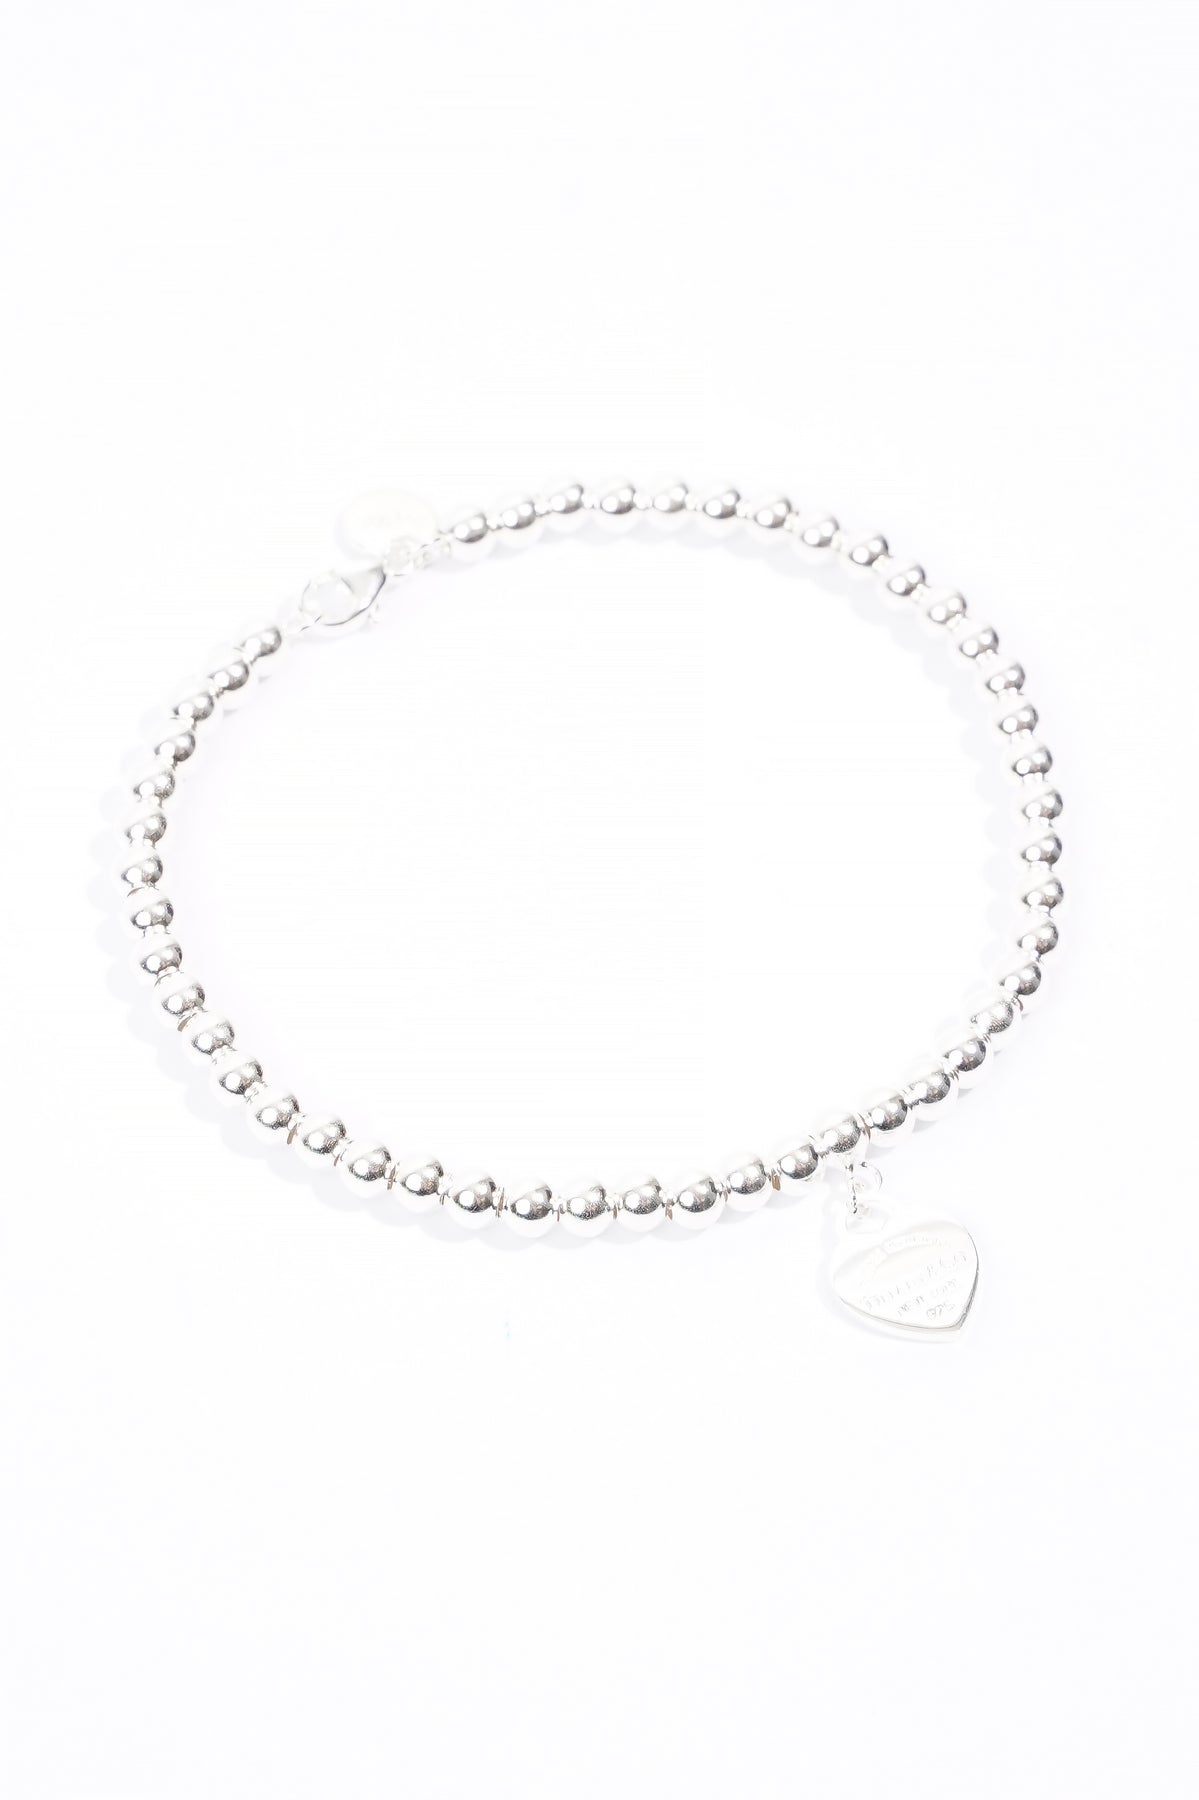 Tiffany and Co Blue Heart Bead Bracelet Silver Silver Sterling 17cm ...